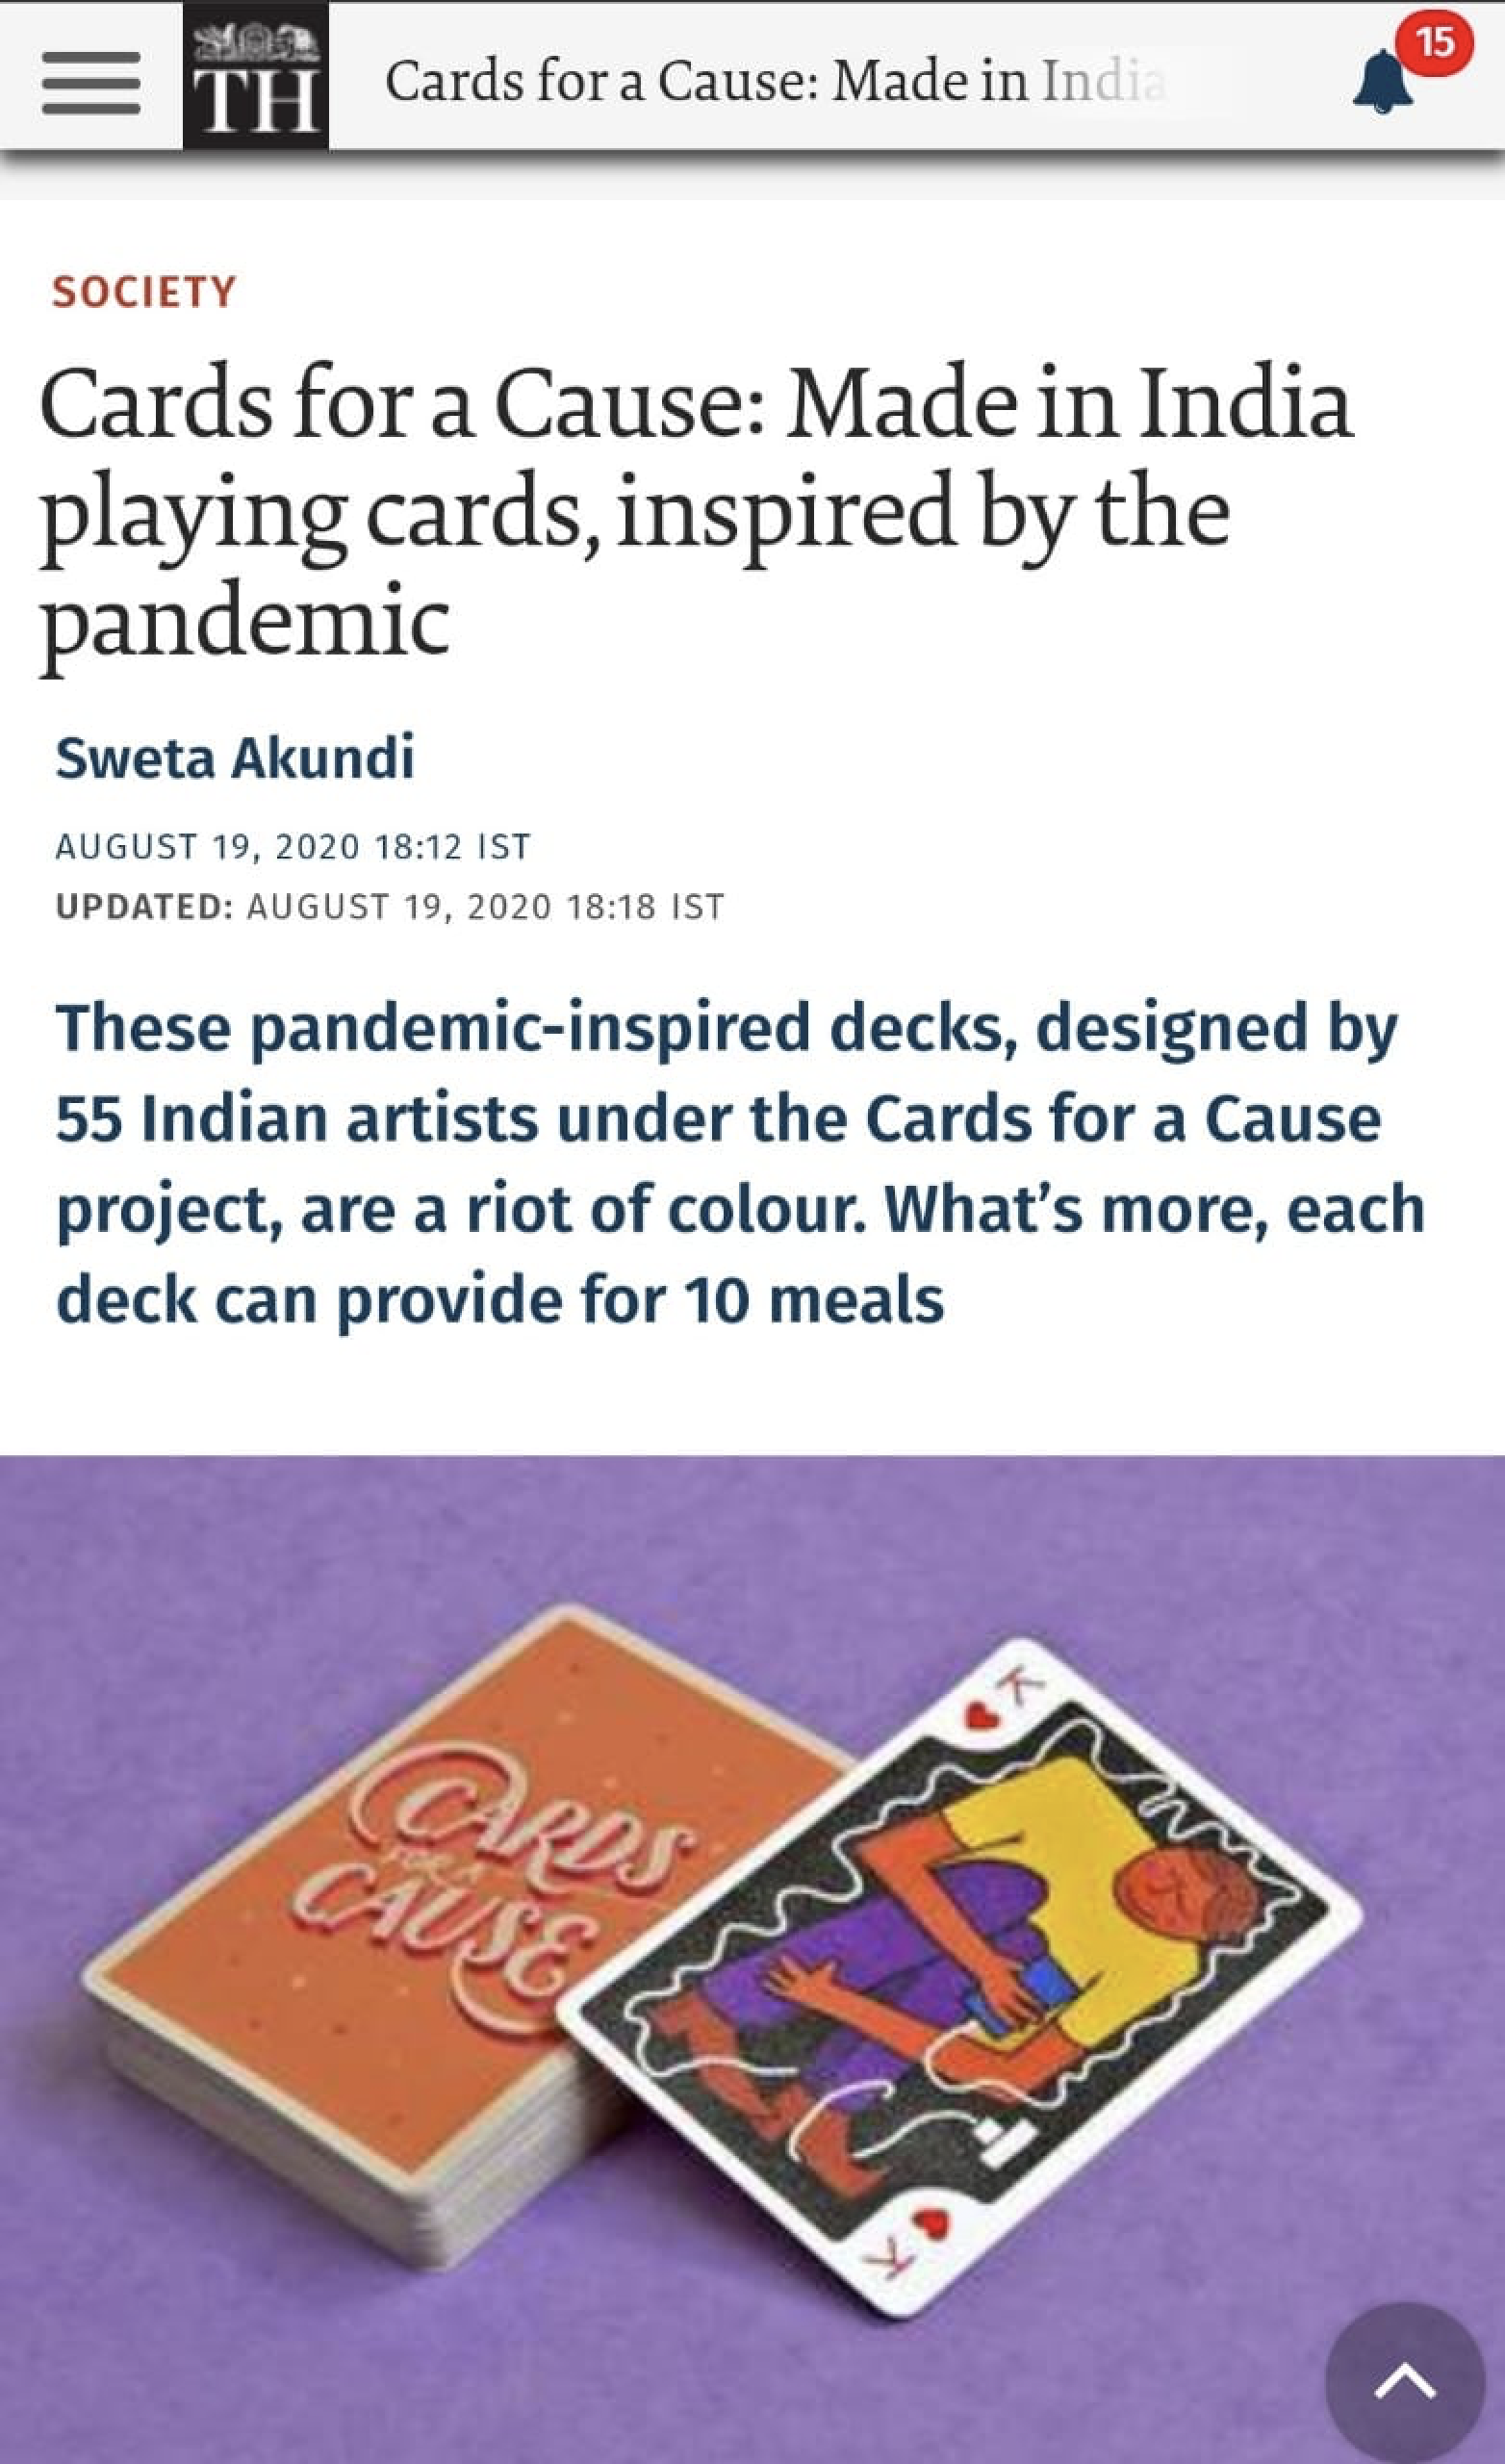 Cards for a Cause featured in The Hindi